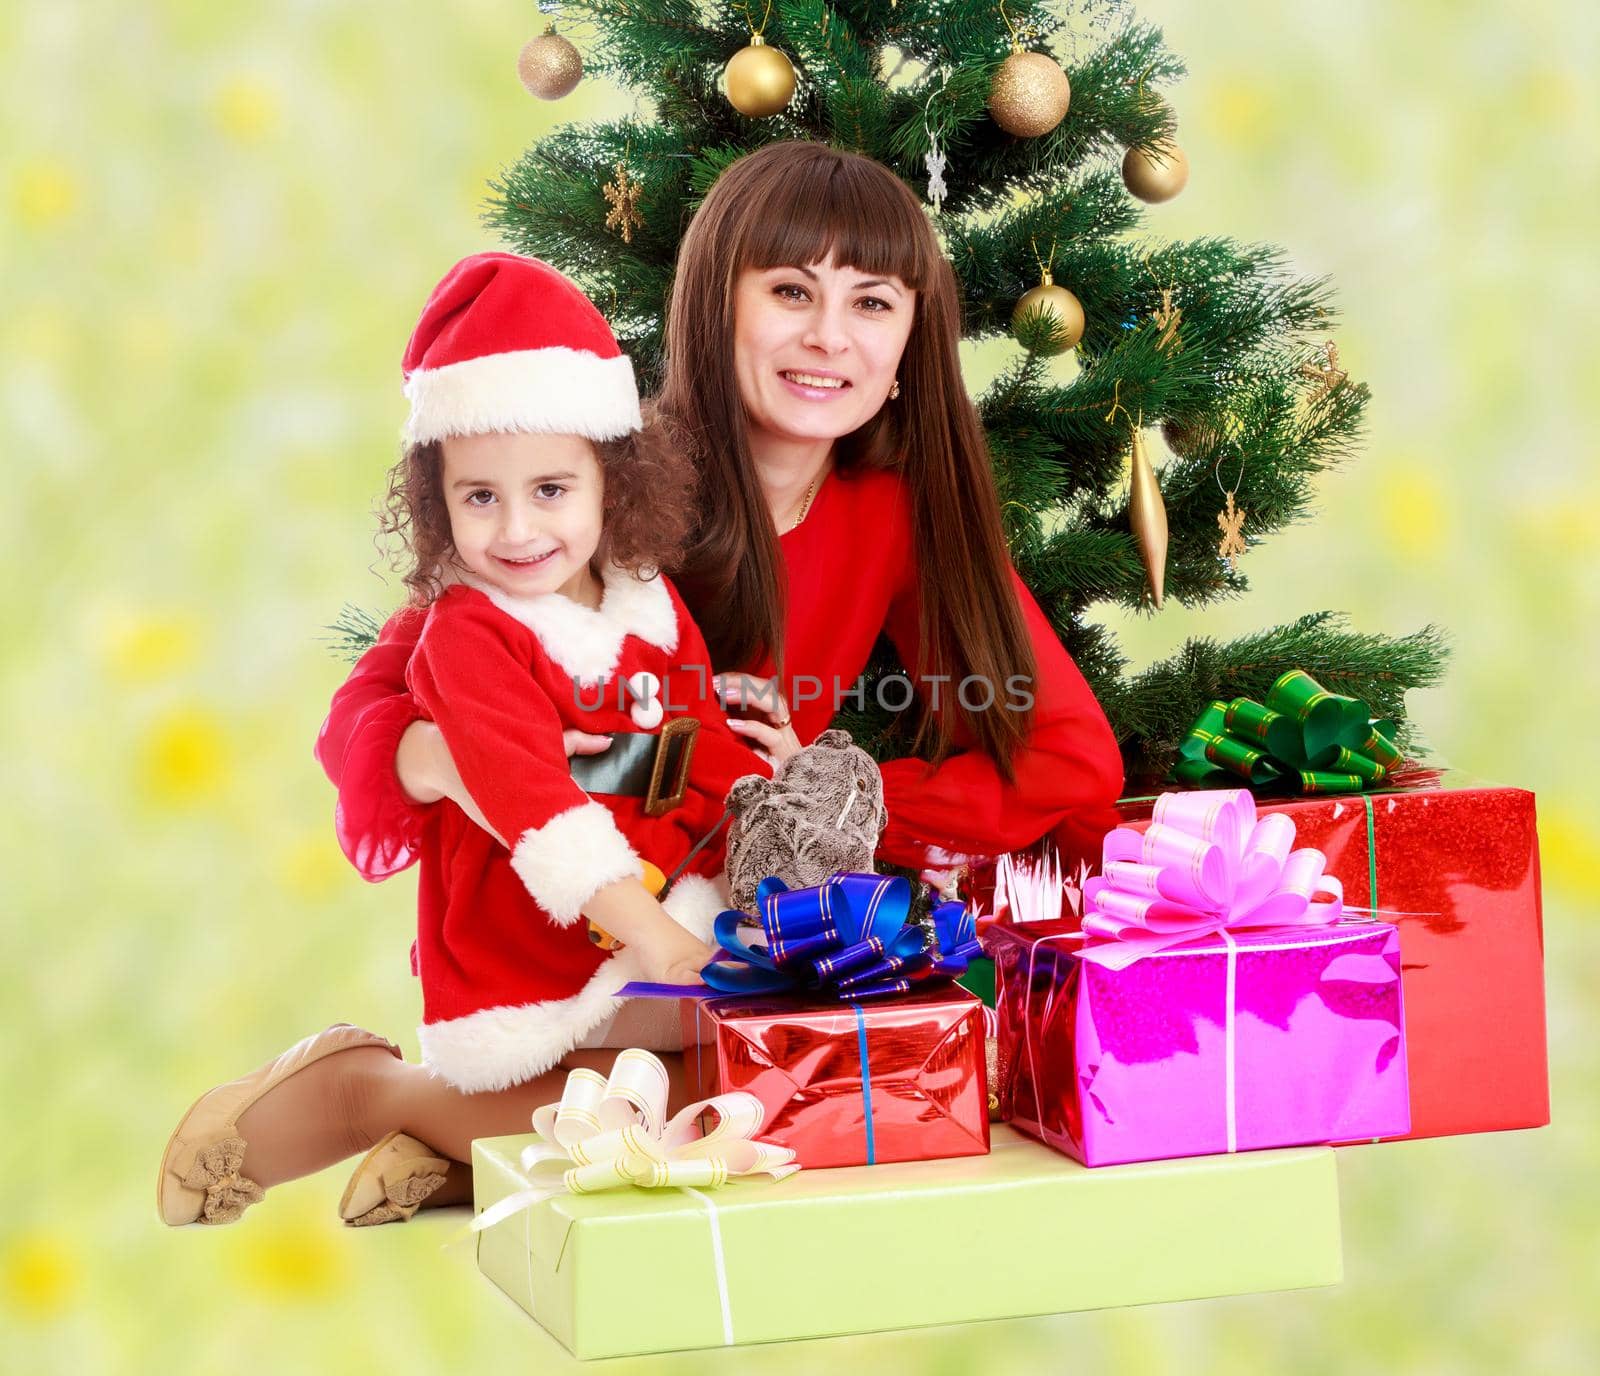 Happy mother and daughter near a Christmas tree surrounded by heaps of gifts.Bright,floral yellow-green blurred background.